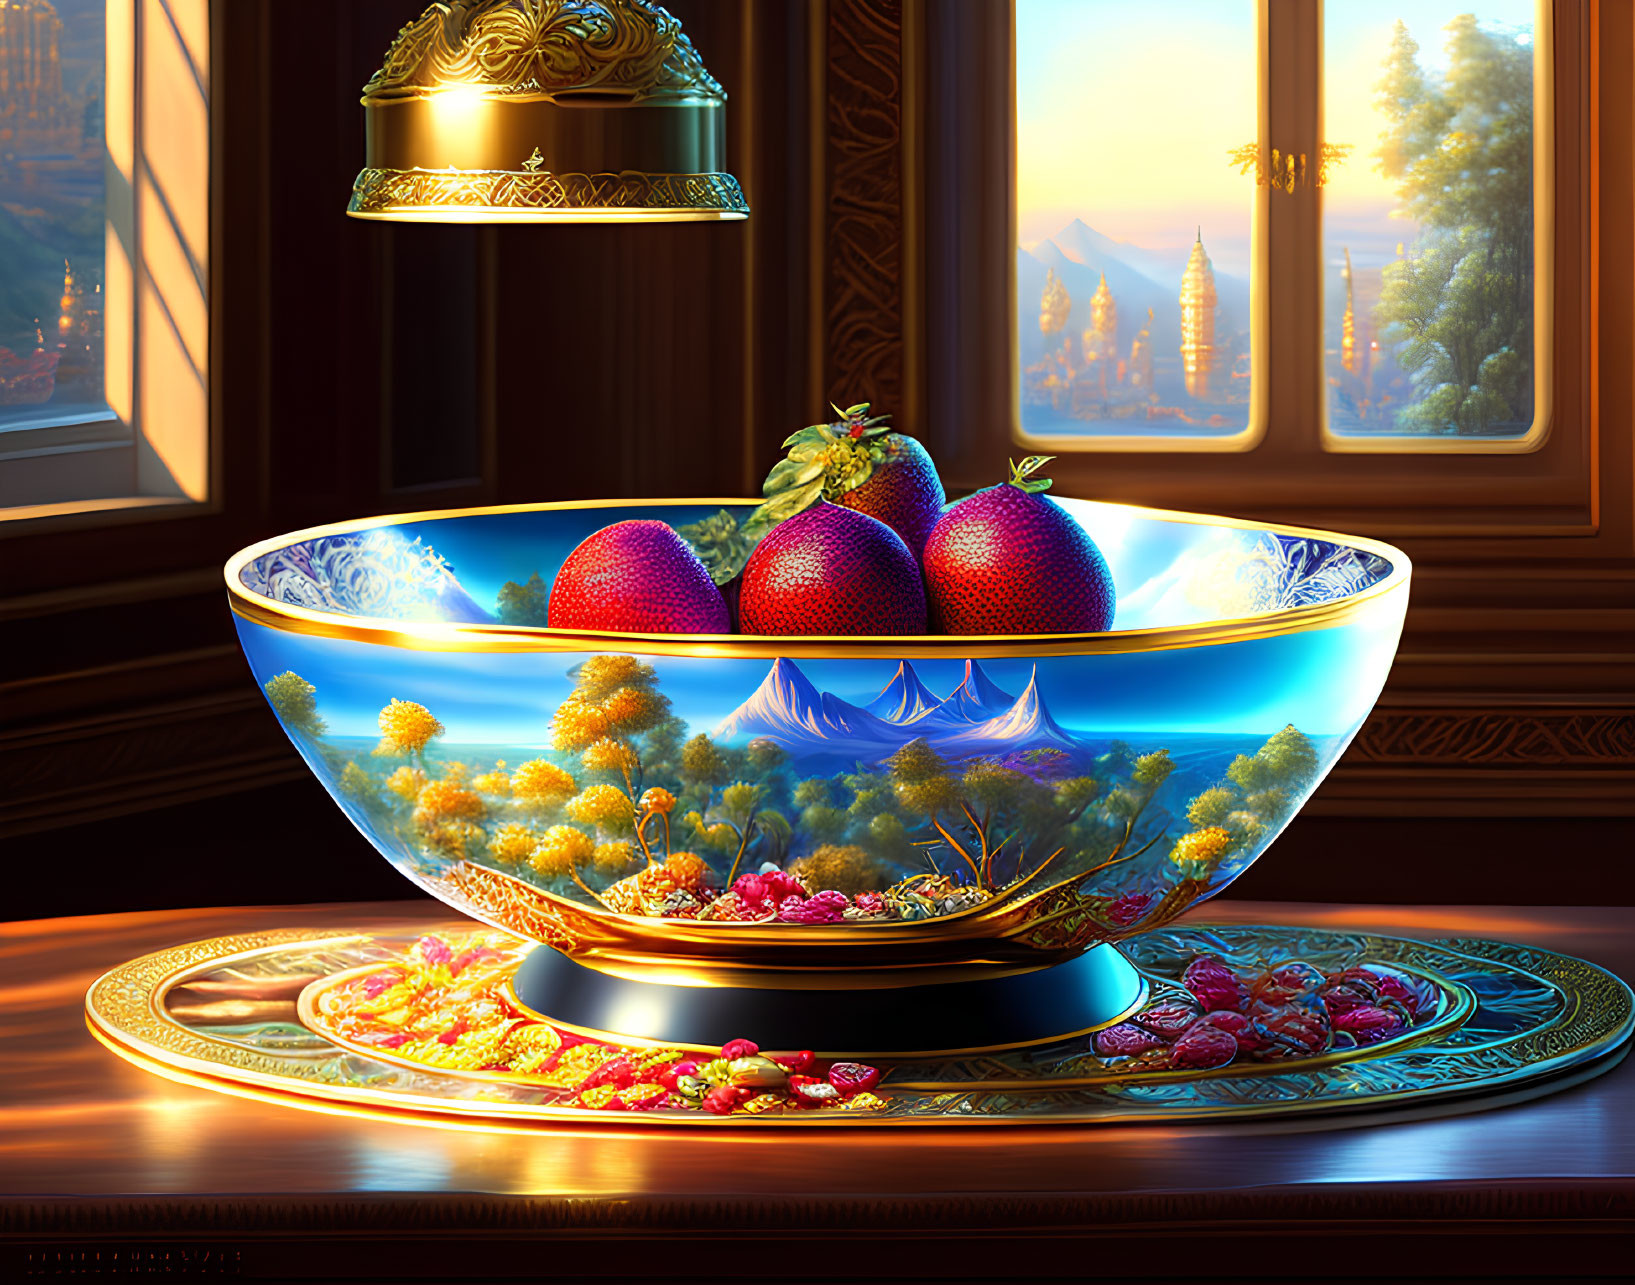 Natural light highlights strawberries in bowl with landscape painting.